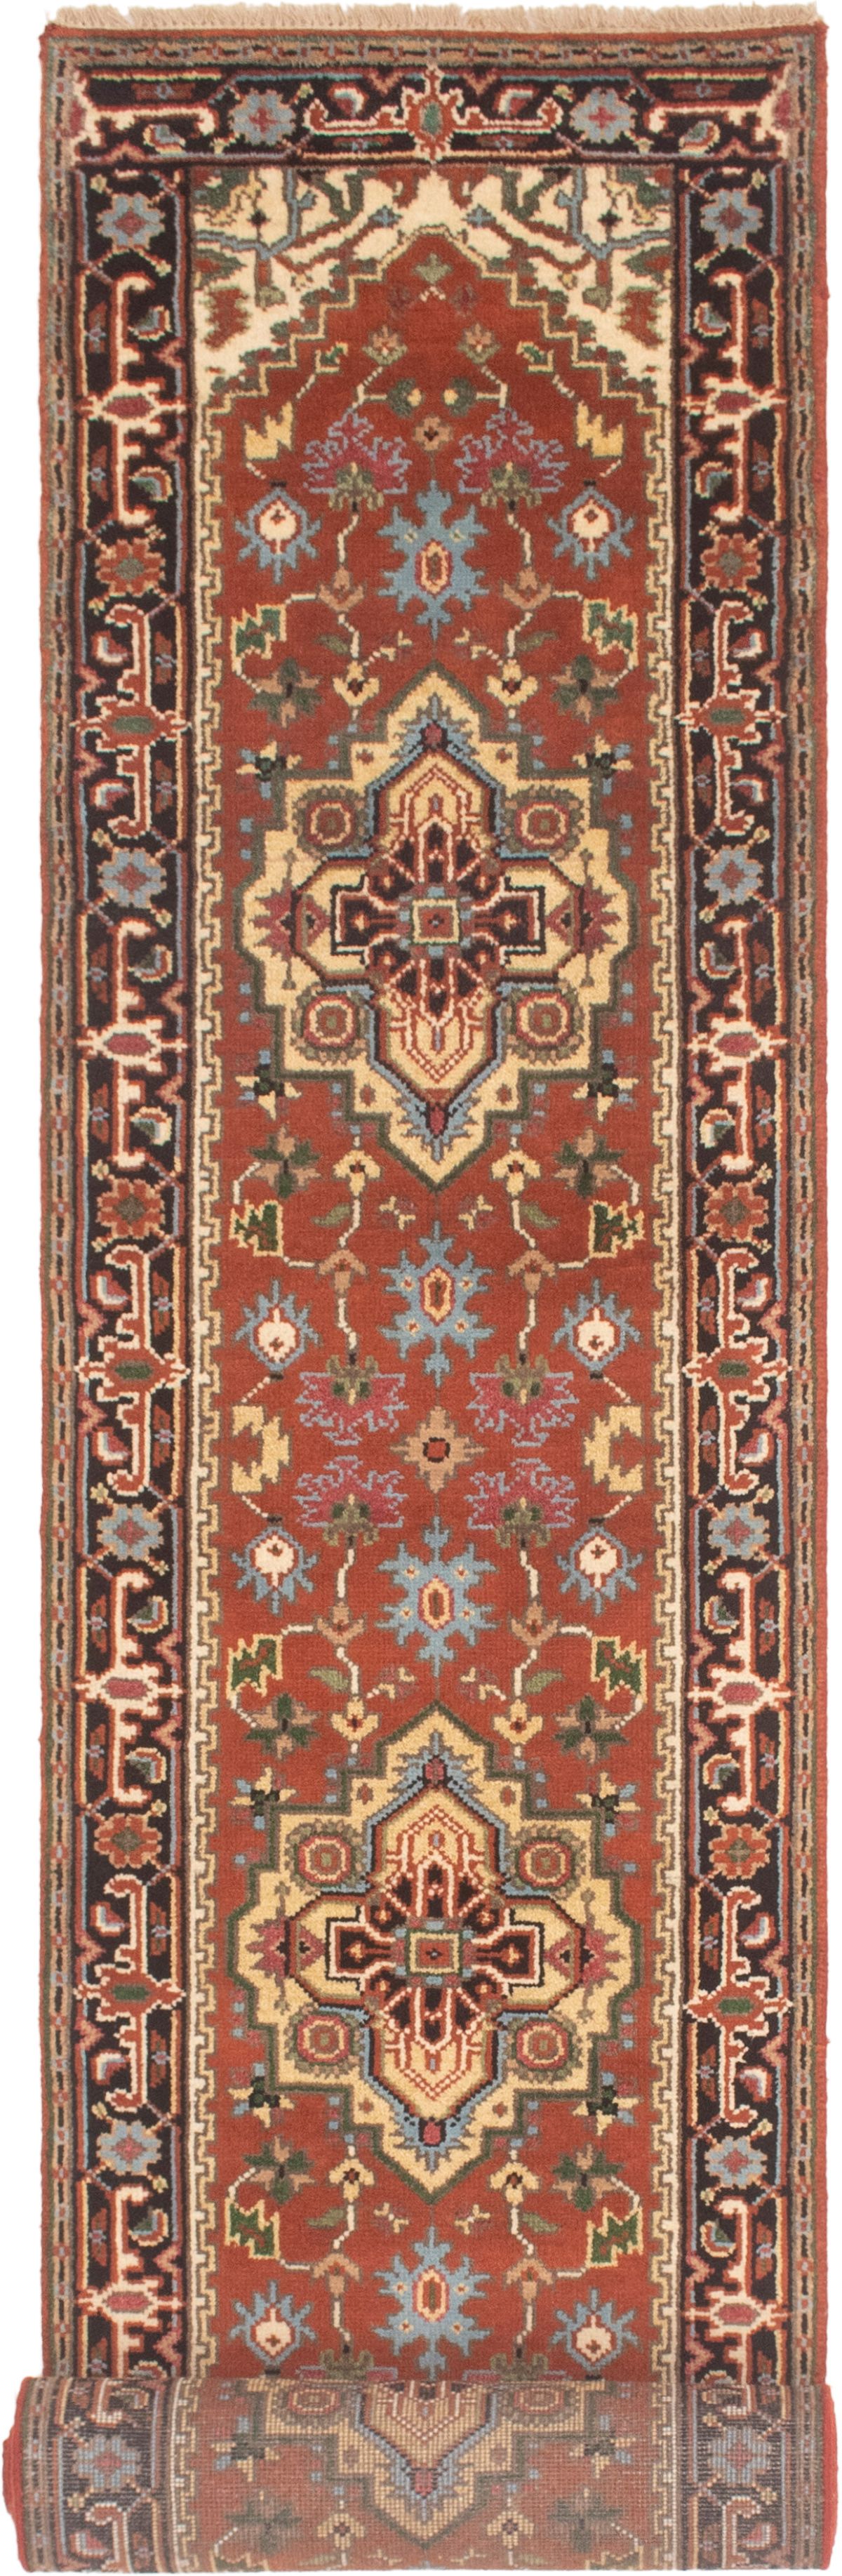 Hand-knotted Serapi Heritage Dark Copper Wool Rug 2'7" x 15'10"  Size: 2'7" x 15'10"  